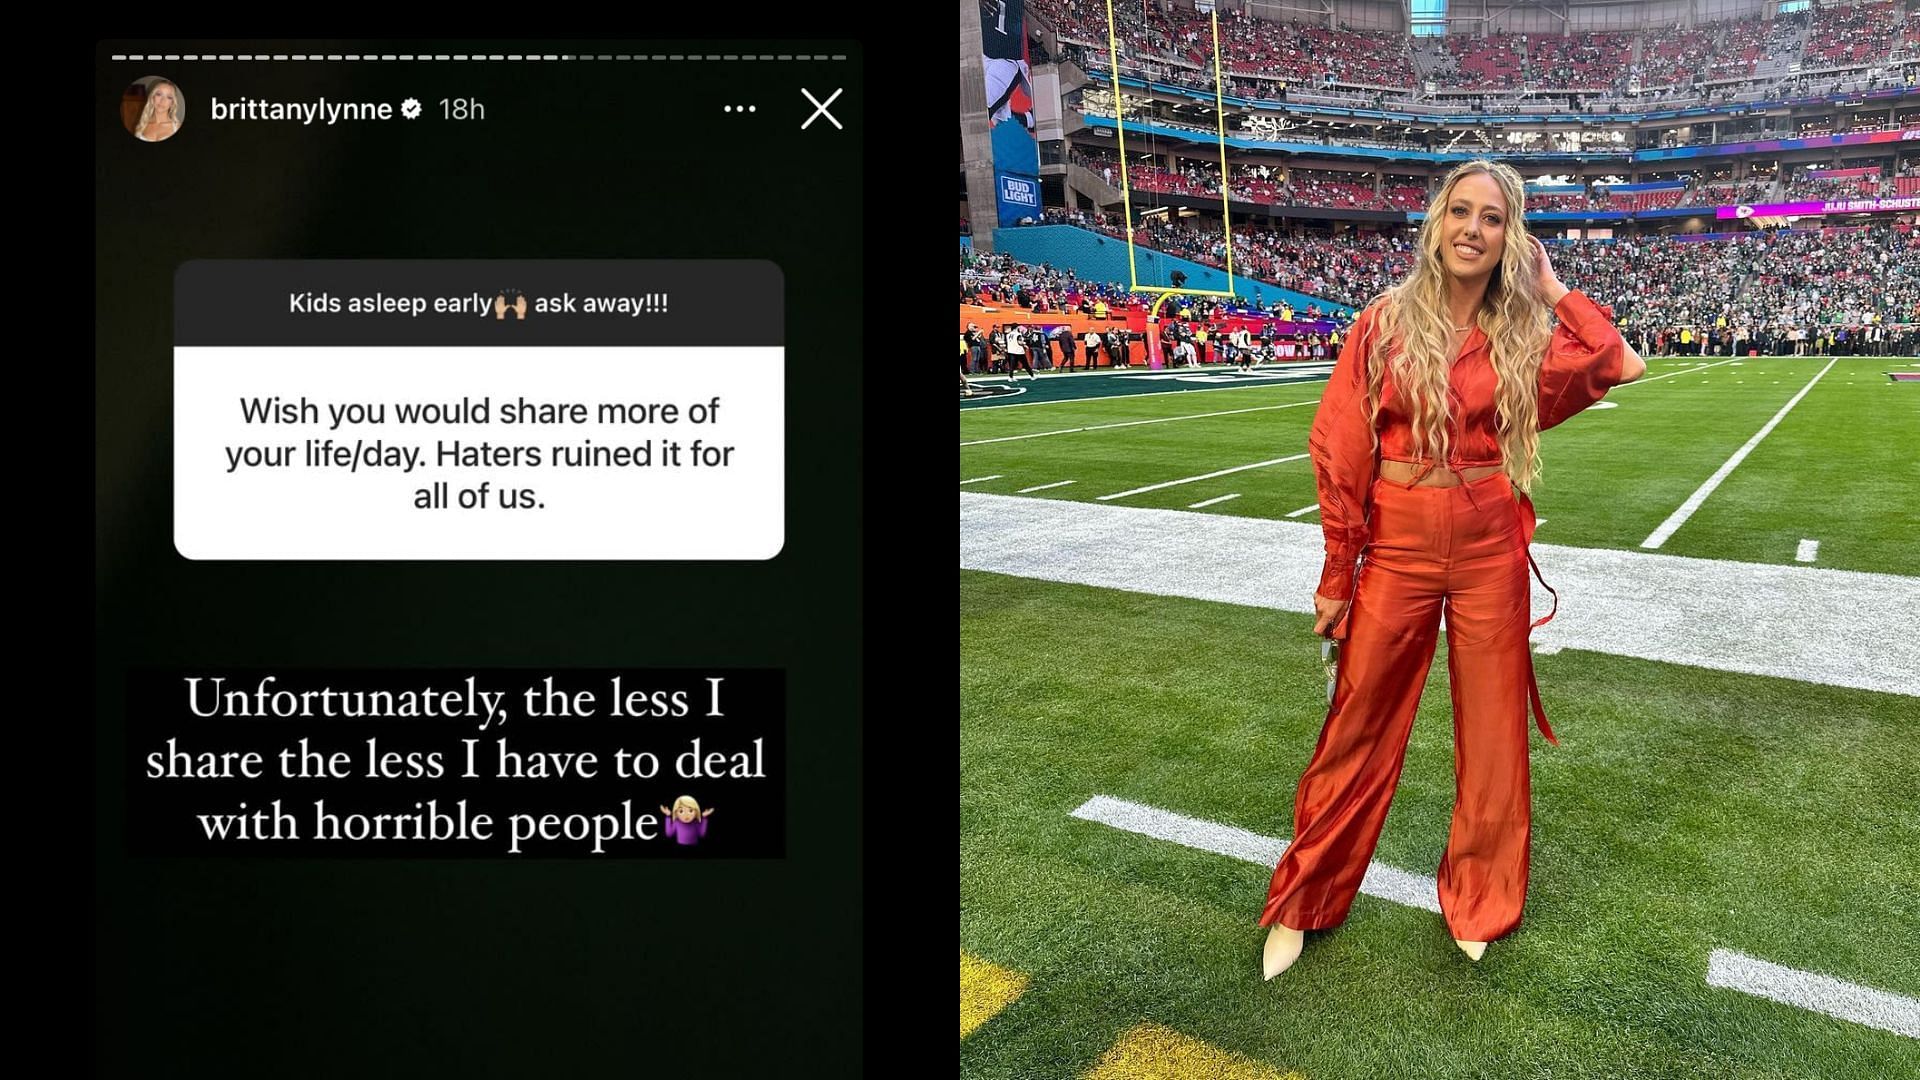 Brittany Mahomes discuss about her experience with haters online.